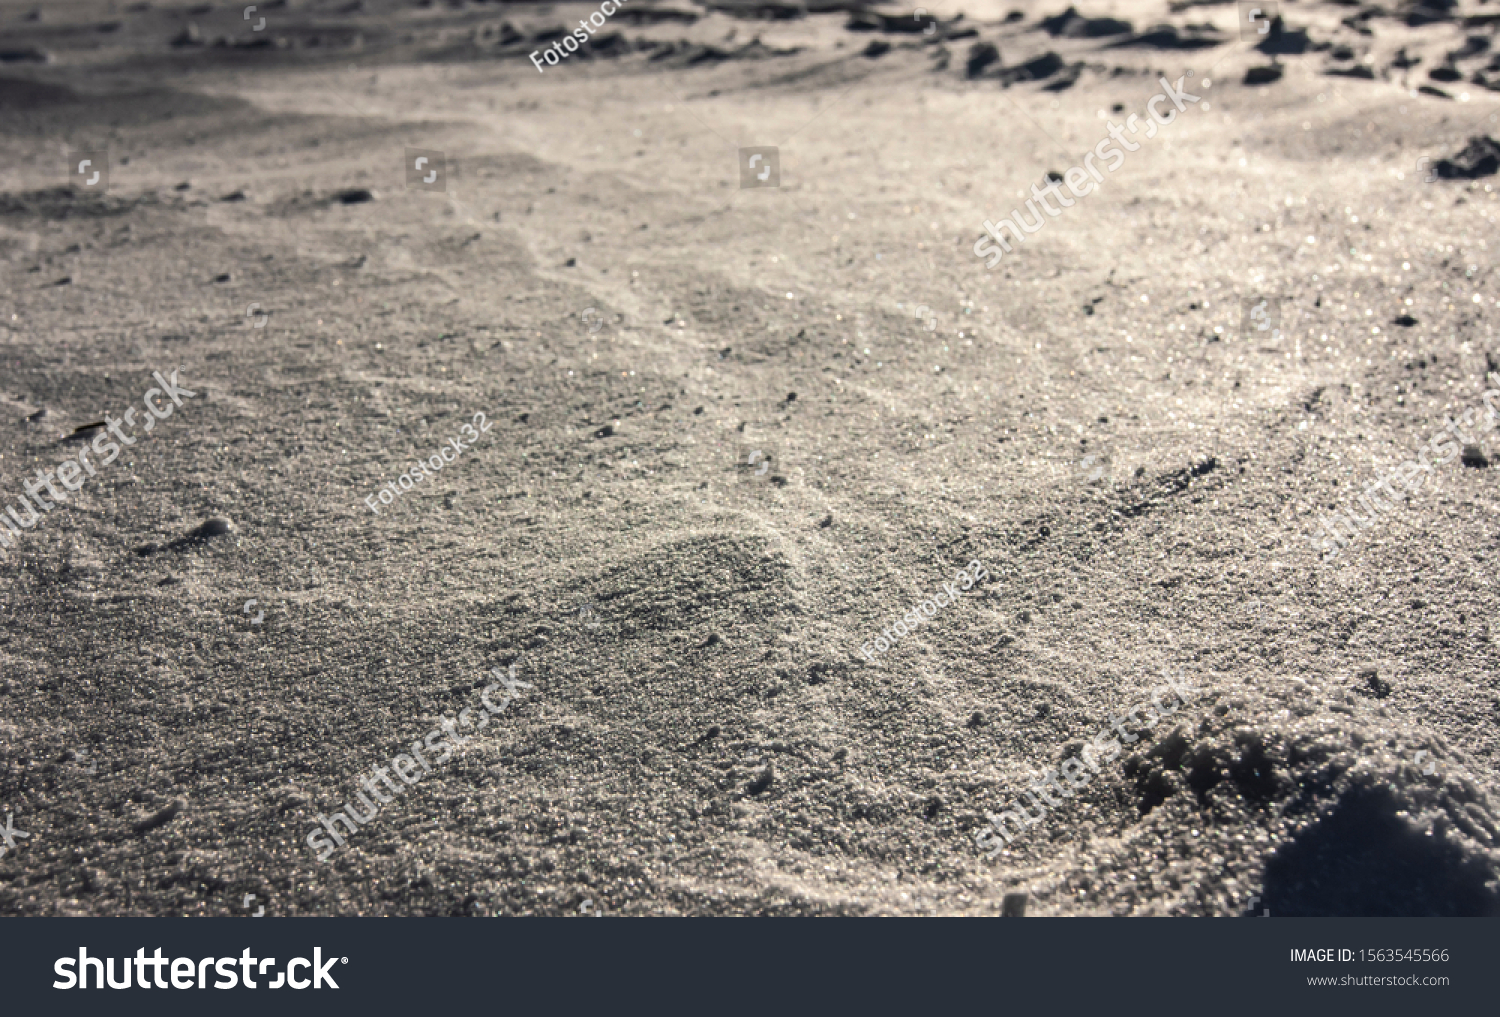 The texture of the lunar surface. Mysterious patterns, mystery and lack of knowledge #1563545566